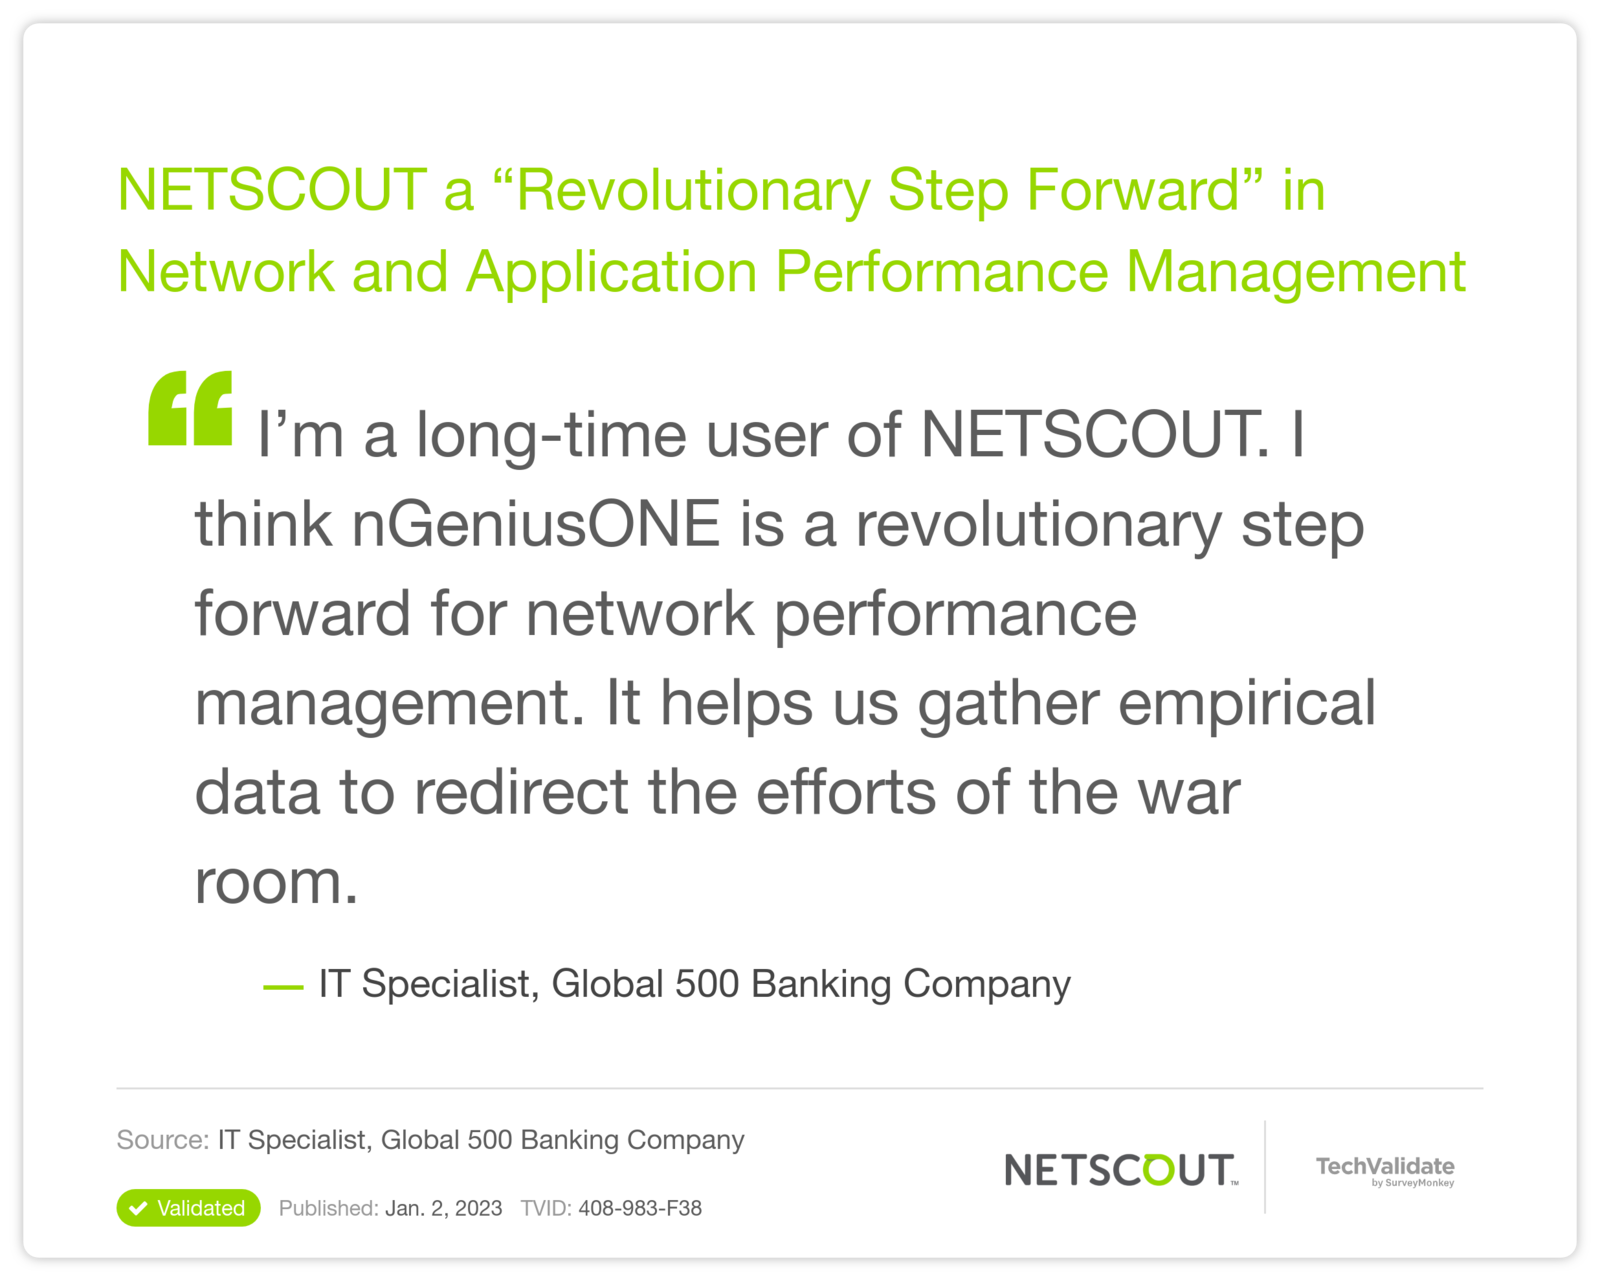 NETSCOUT a "Revolutionary Step Forward" in Network and Application Performance Management